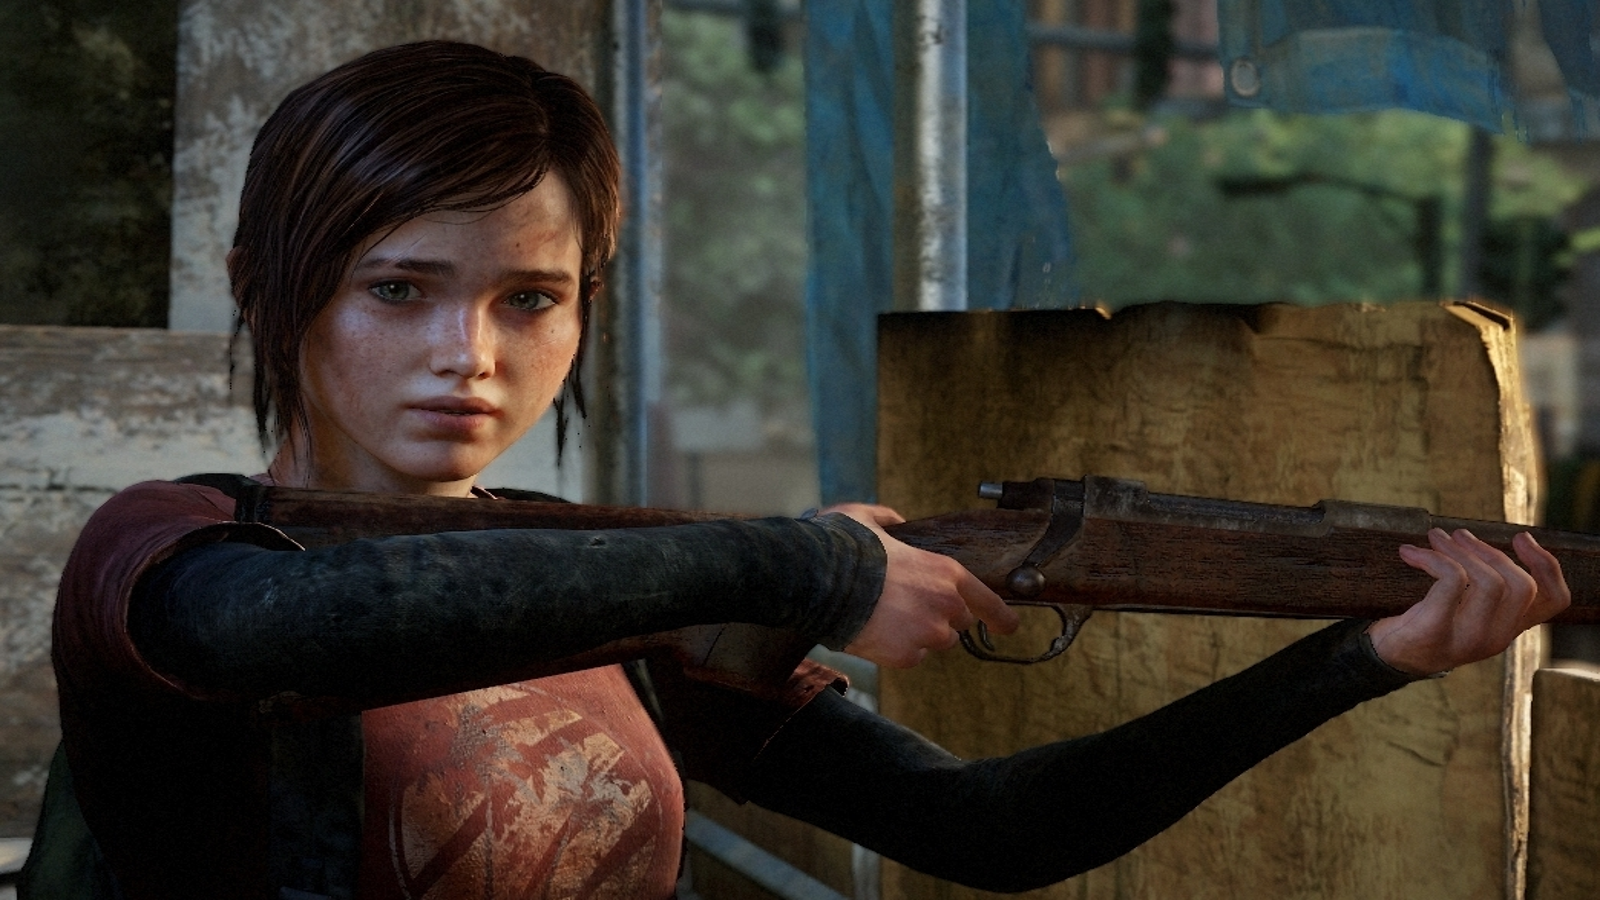 How The Last of Us turns the apocalypse into mindless